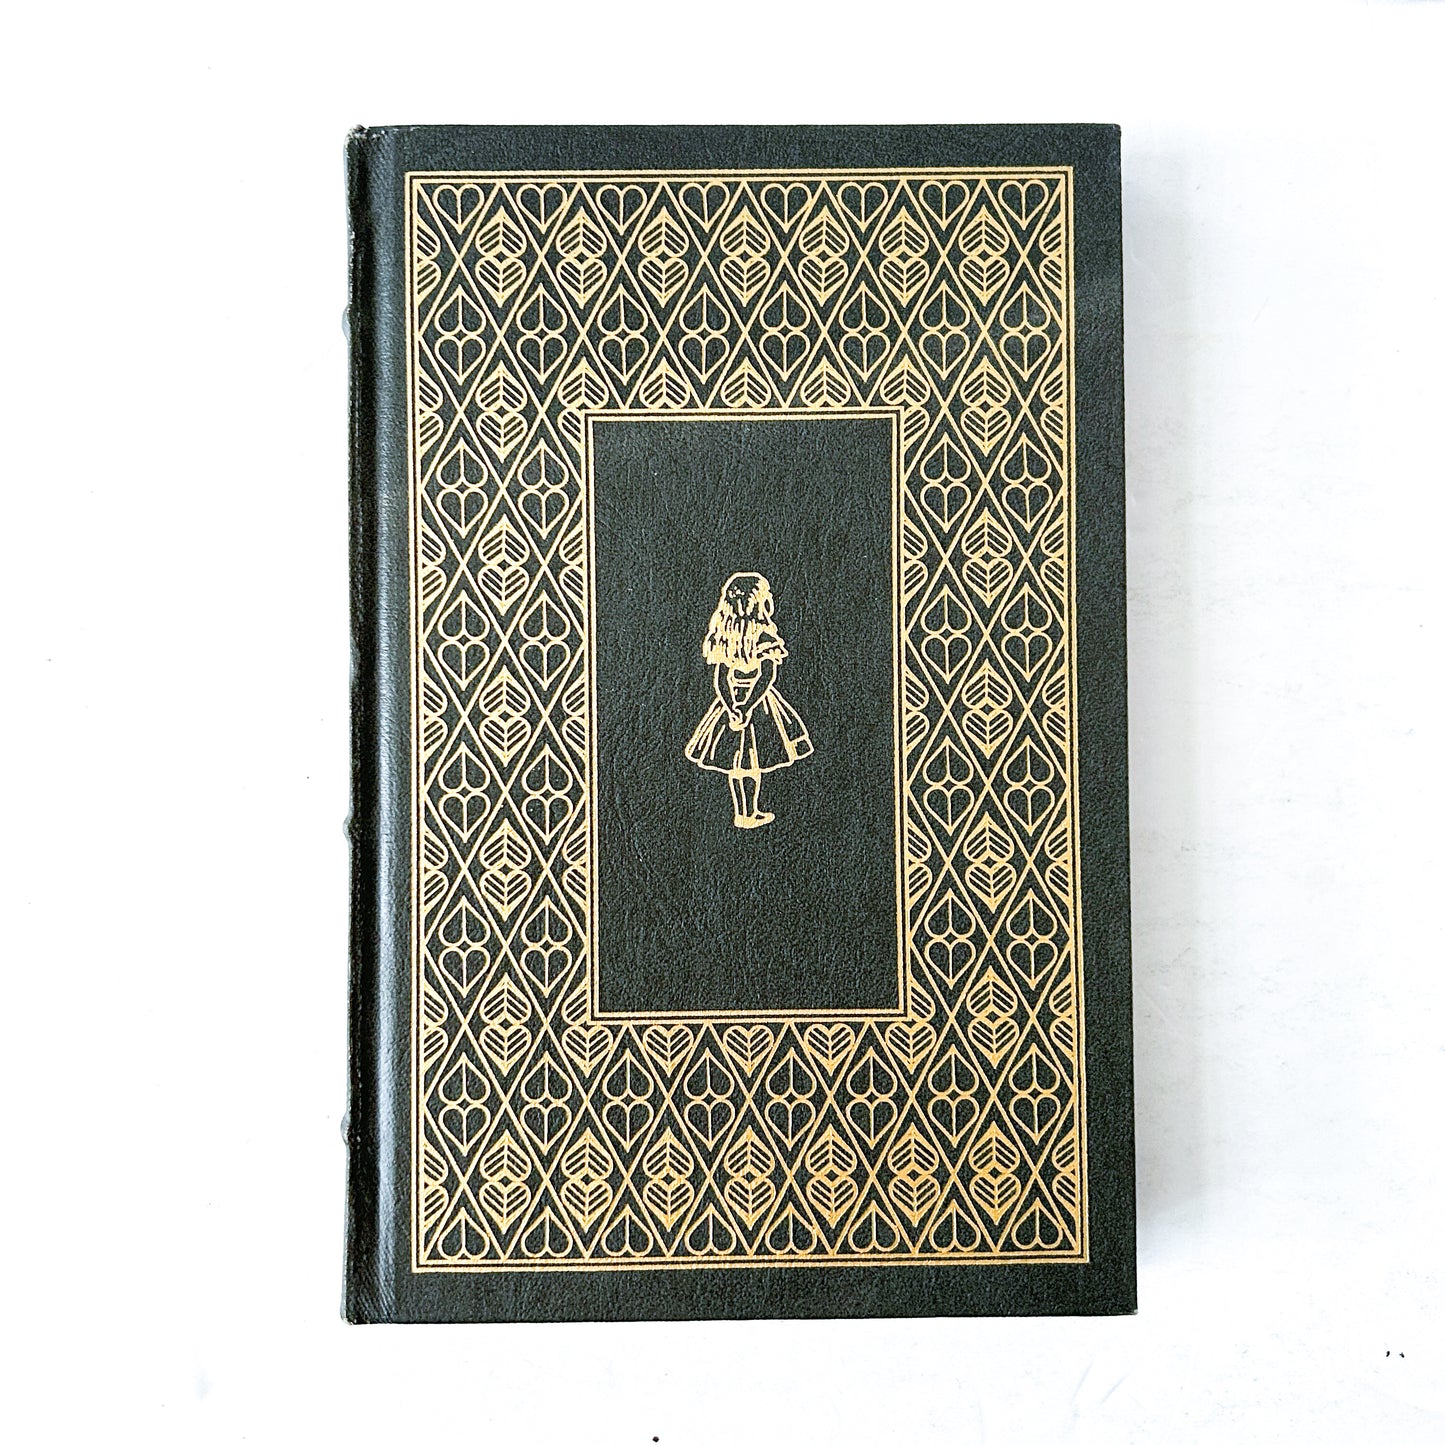 Alice's Adventures in Wonderland, Vintage Edition from The Franklin Library